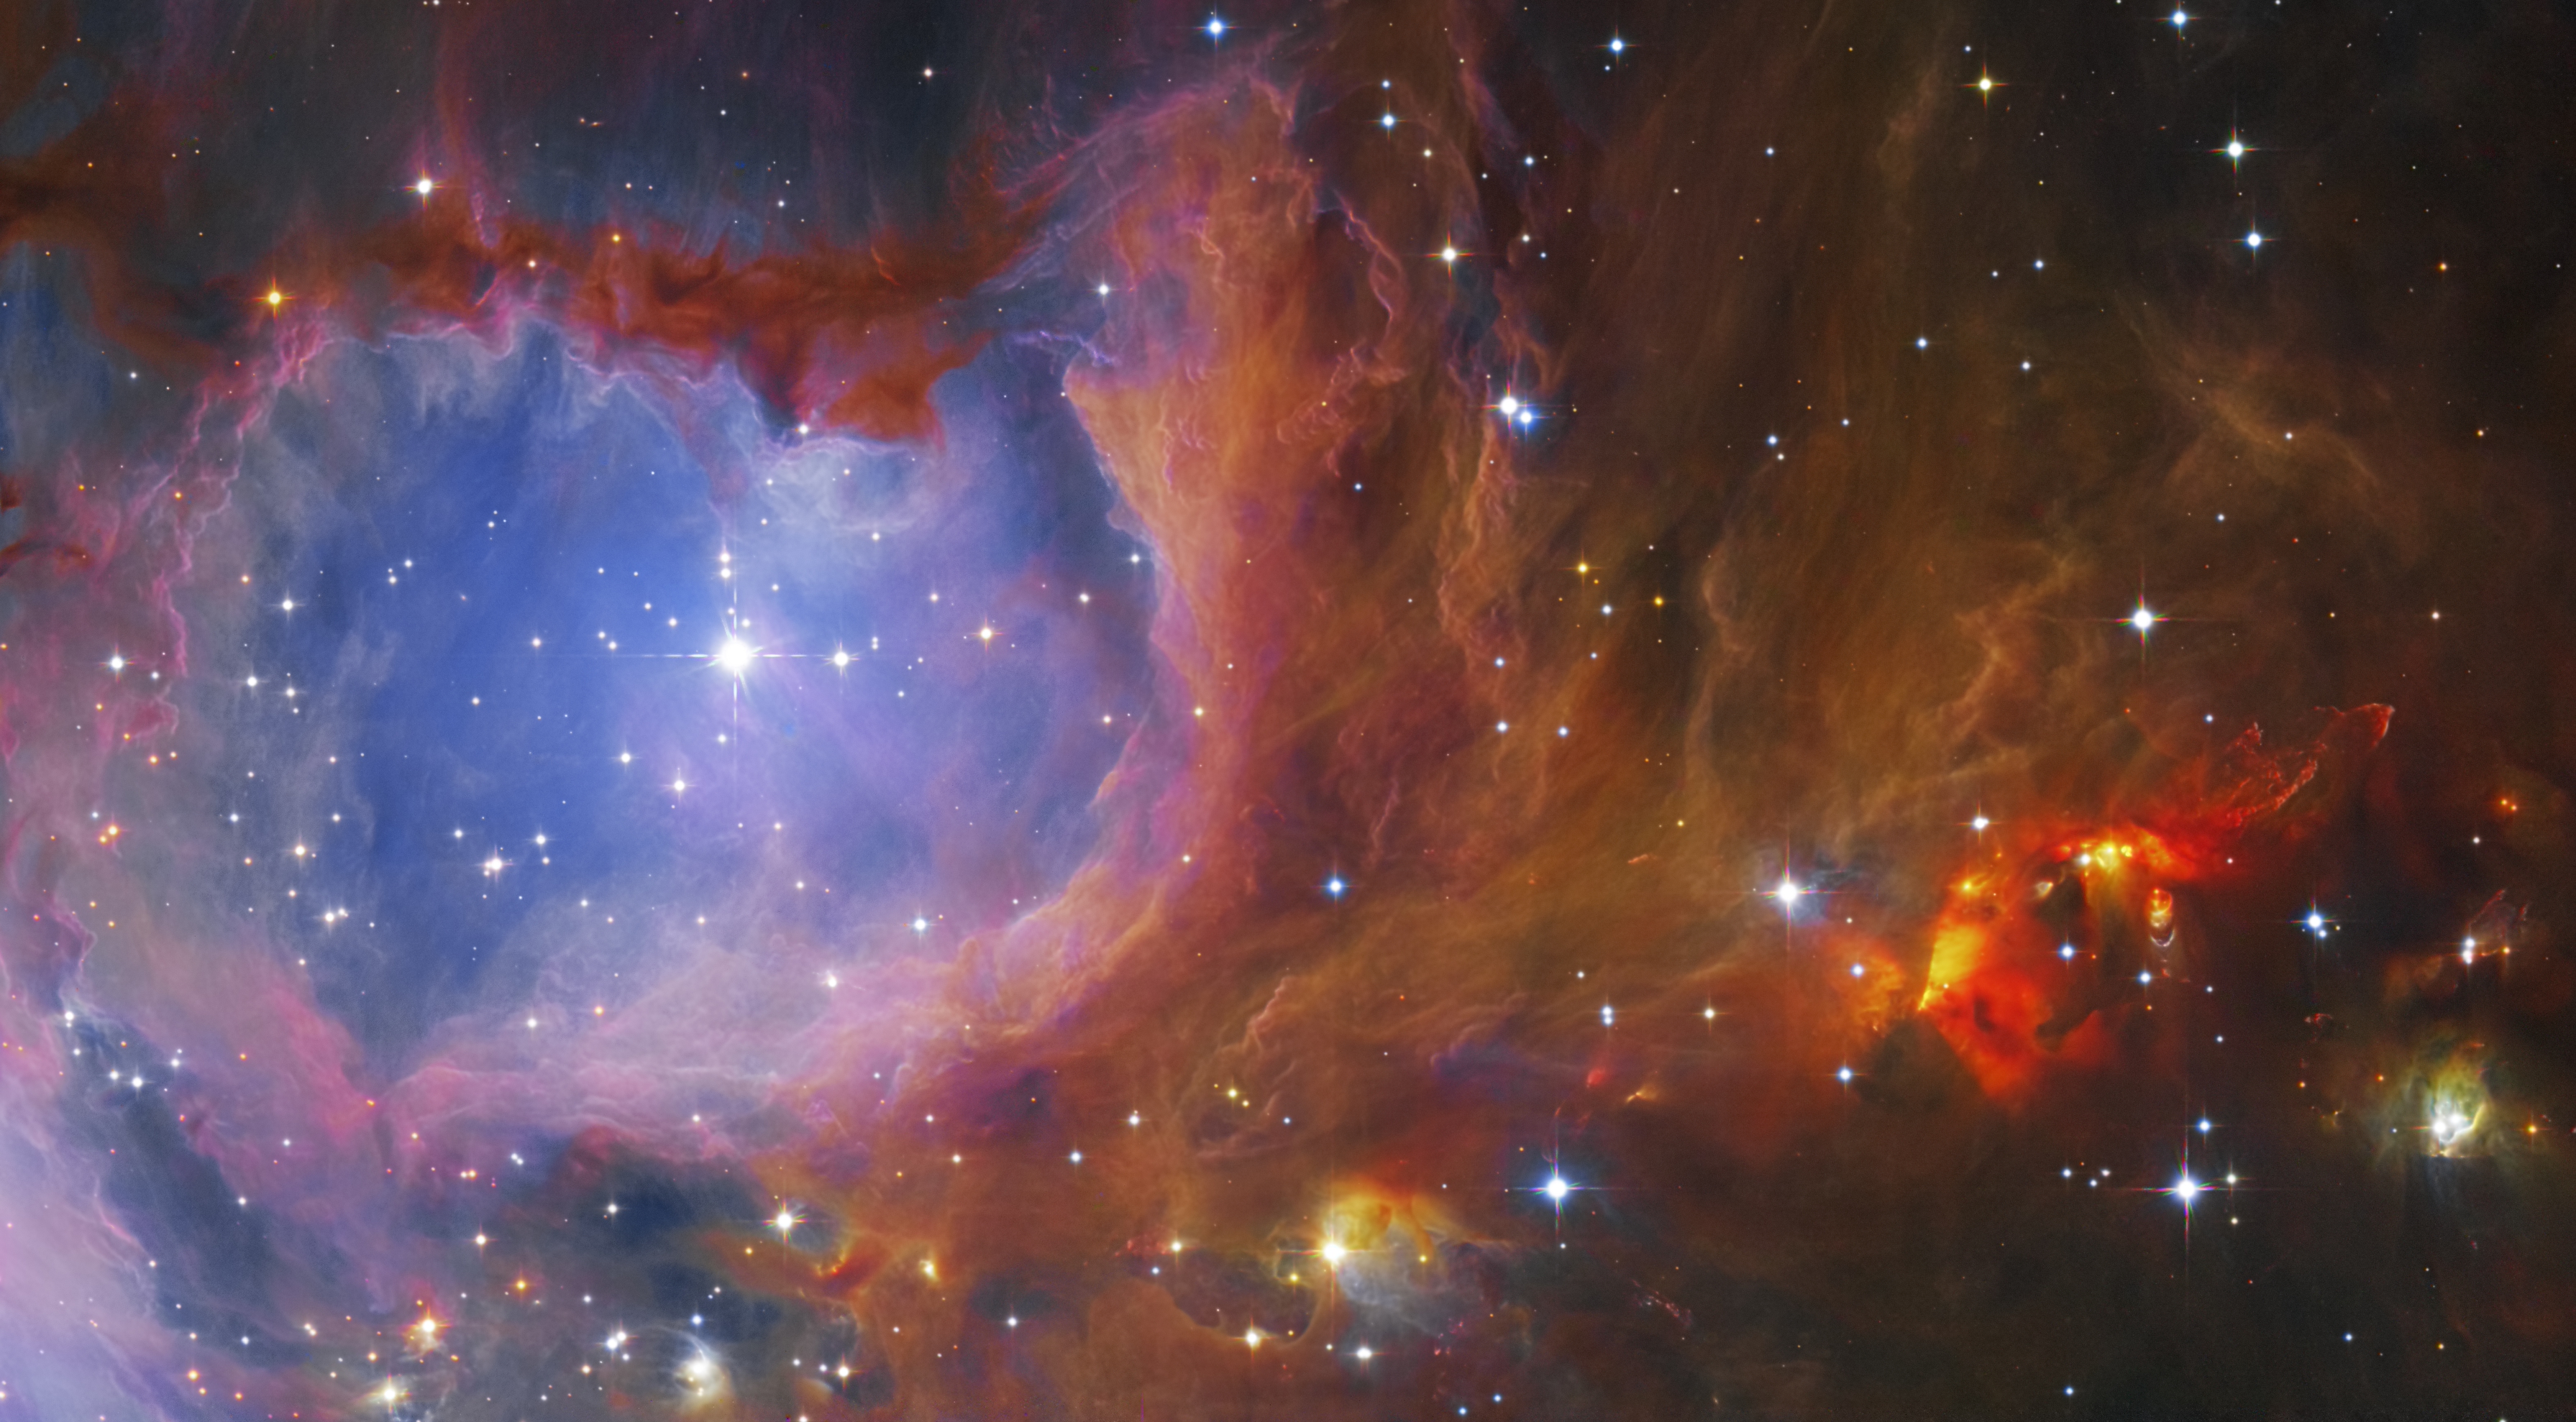 A View of Clouds of Cosmic Dust in the Region of Orion